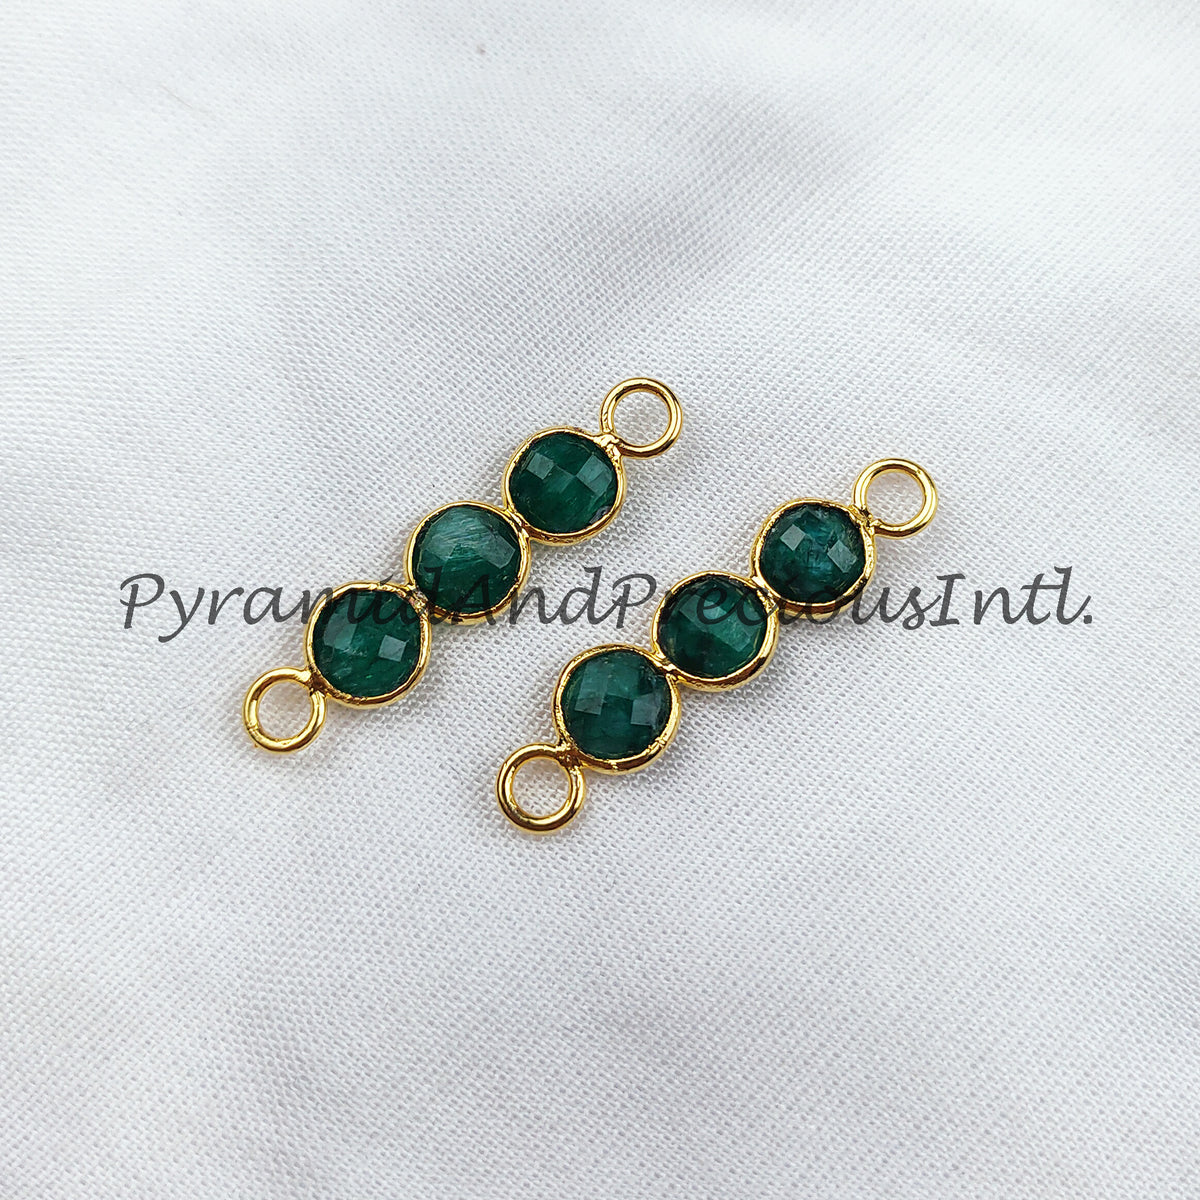 Emerald Connectors, Faceted Emerald Double Bail Connectors, 14K Gold Plated Connector, Green Emerald Charm Connector, Sold By Piece